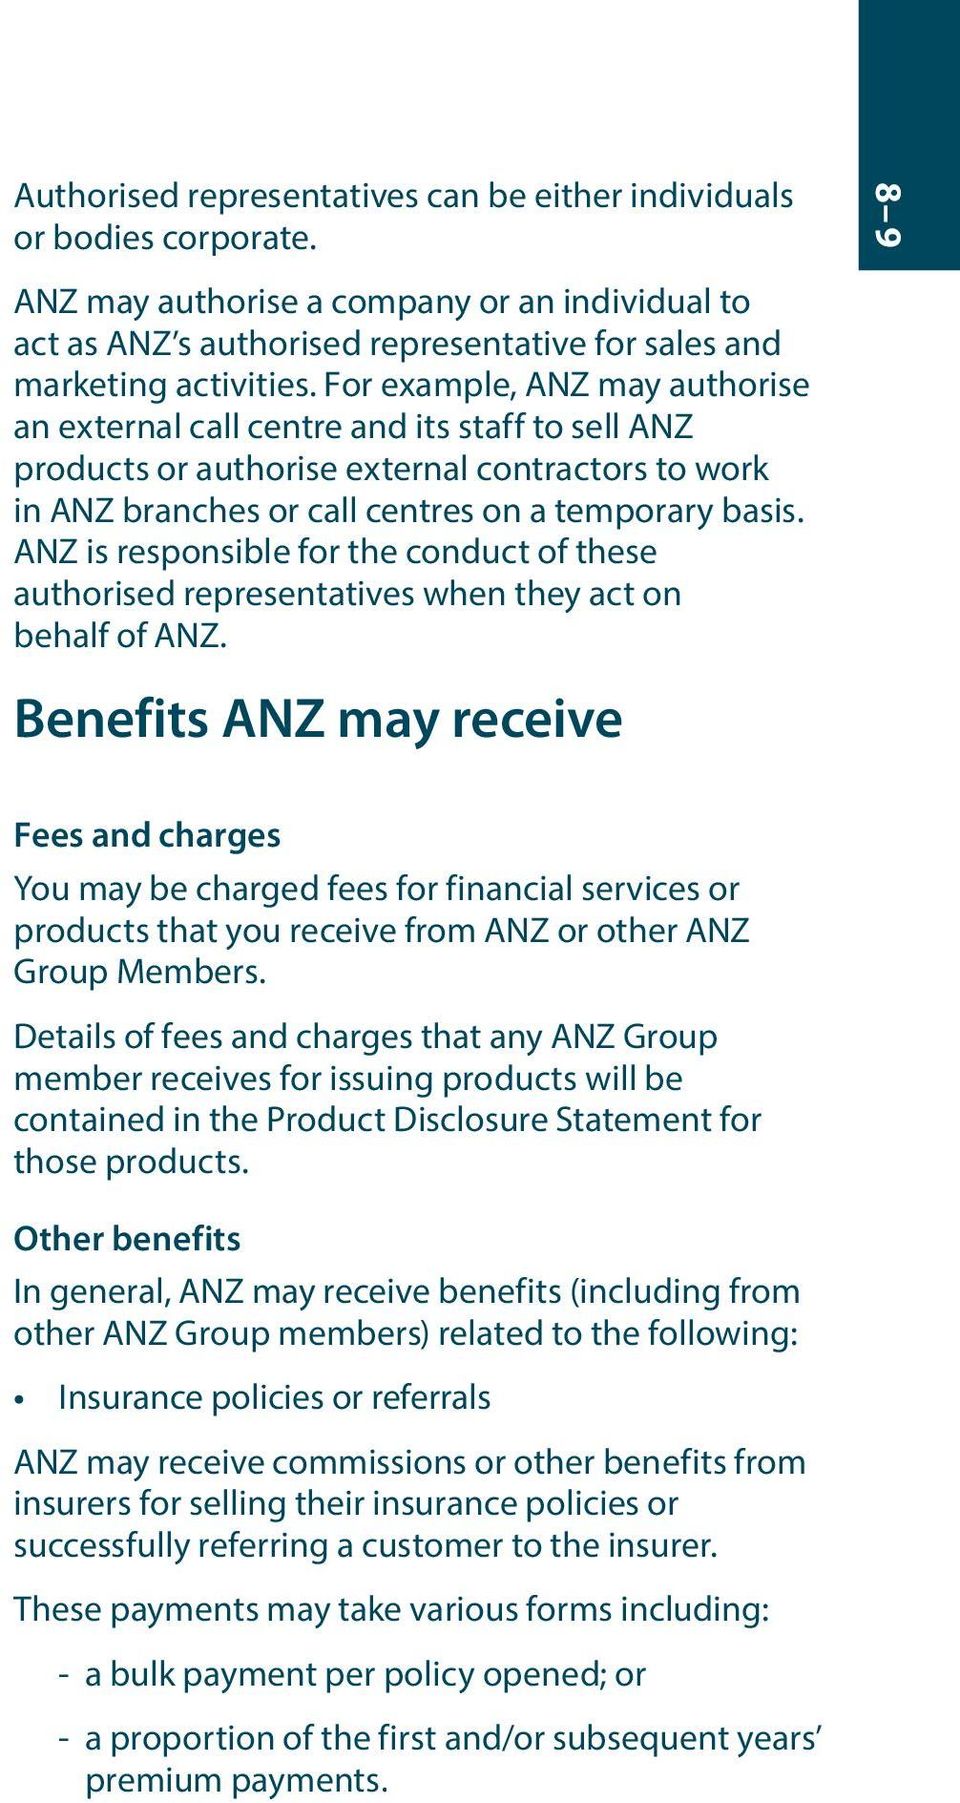 ANZ is responsible for the conduct of these authorised representatives when they act on behalf of ANZ.